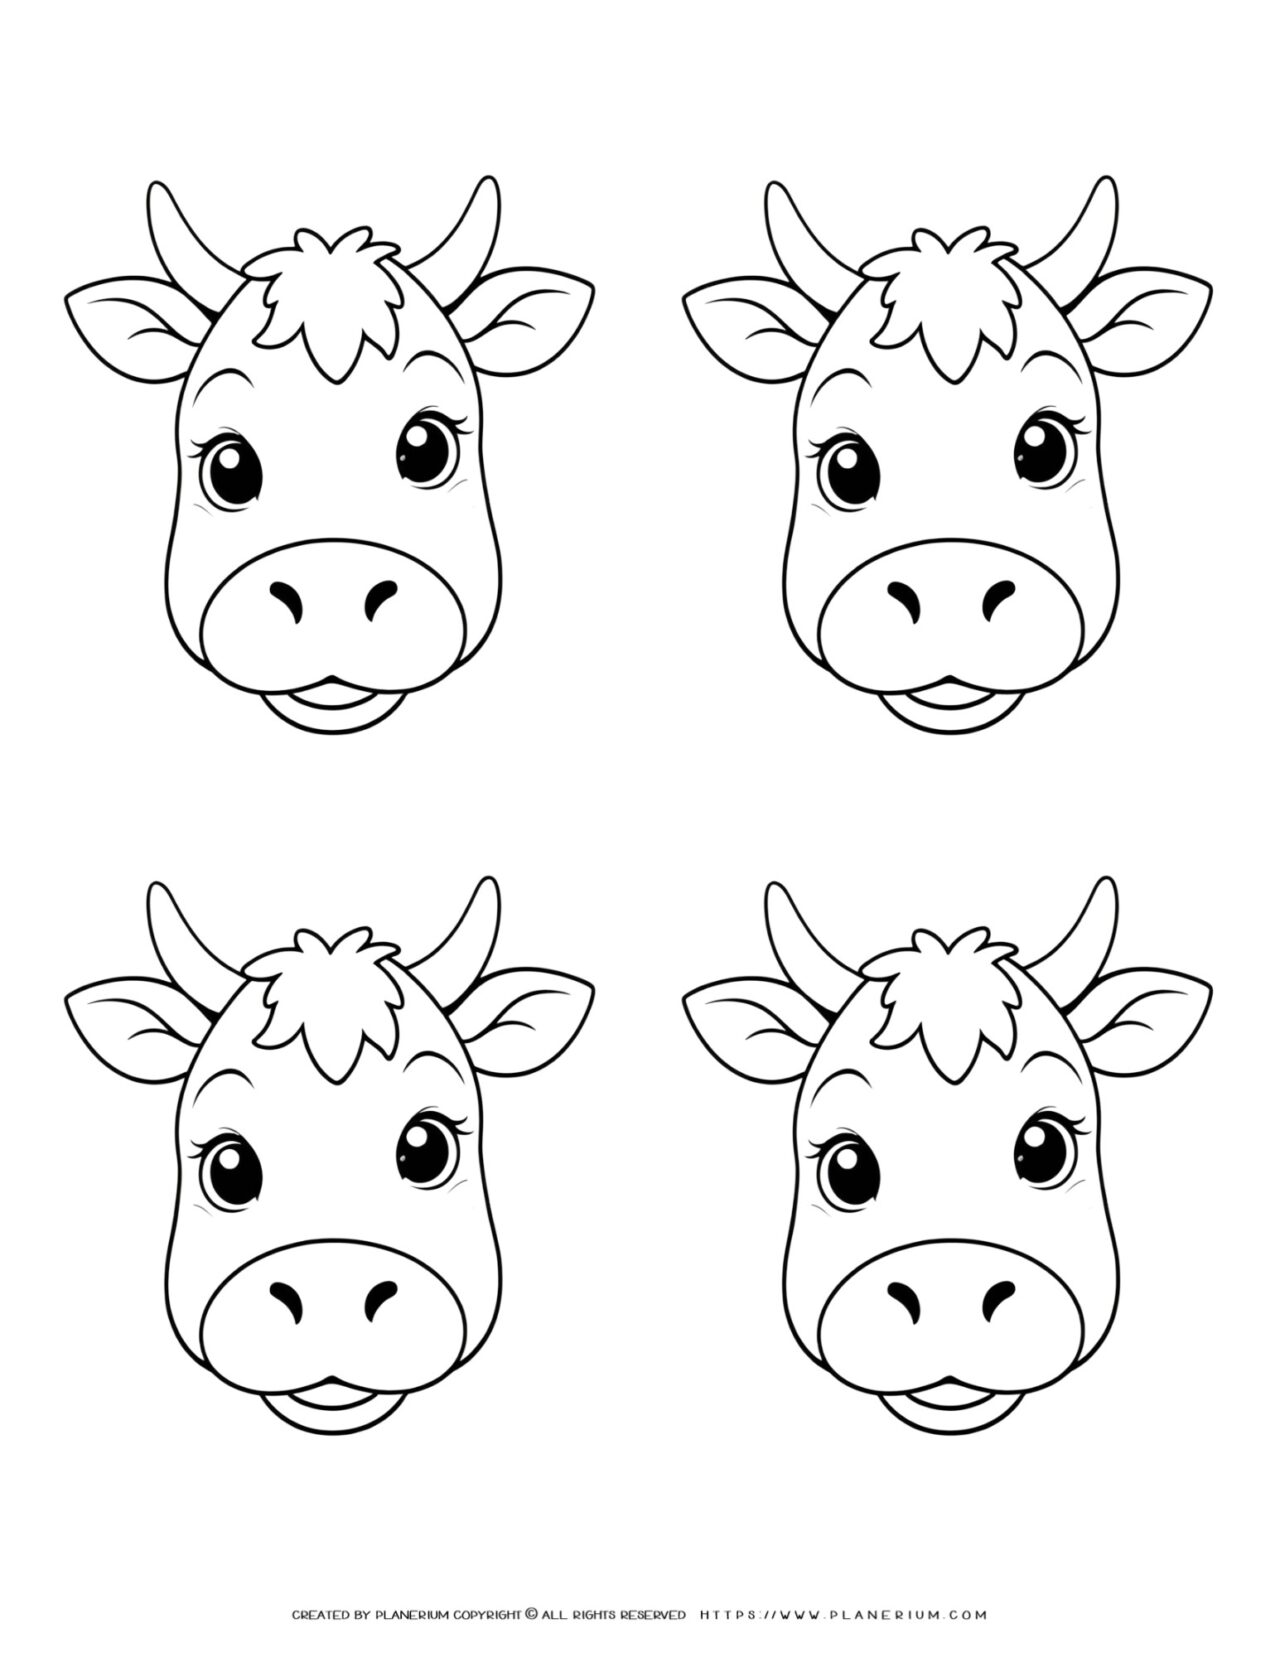 four-baby-cow-faces-outlines-coloring-page